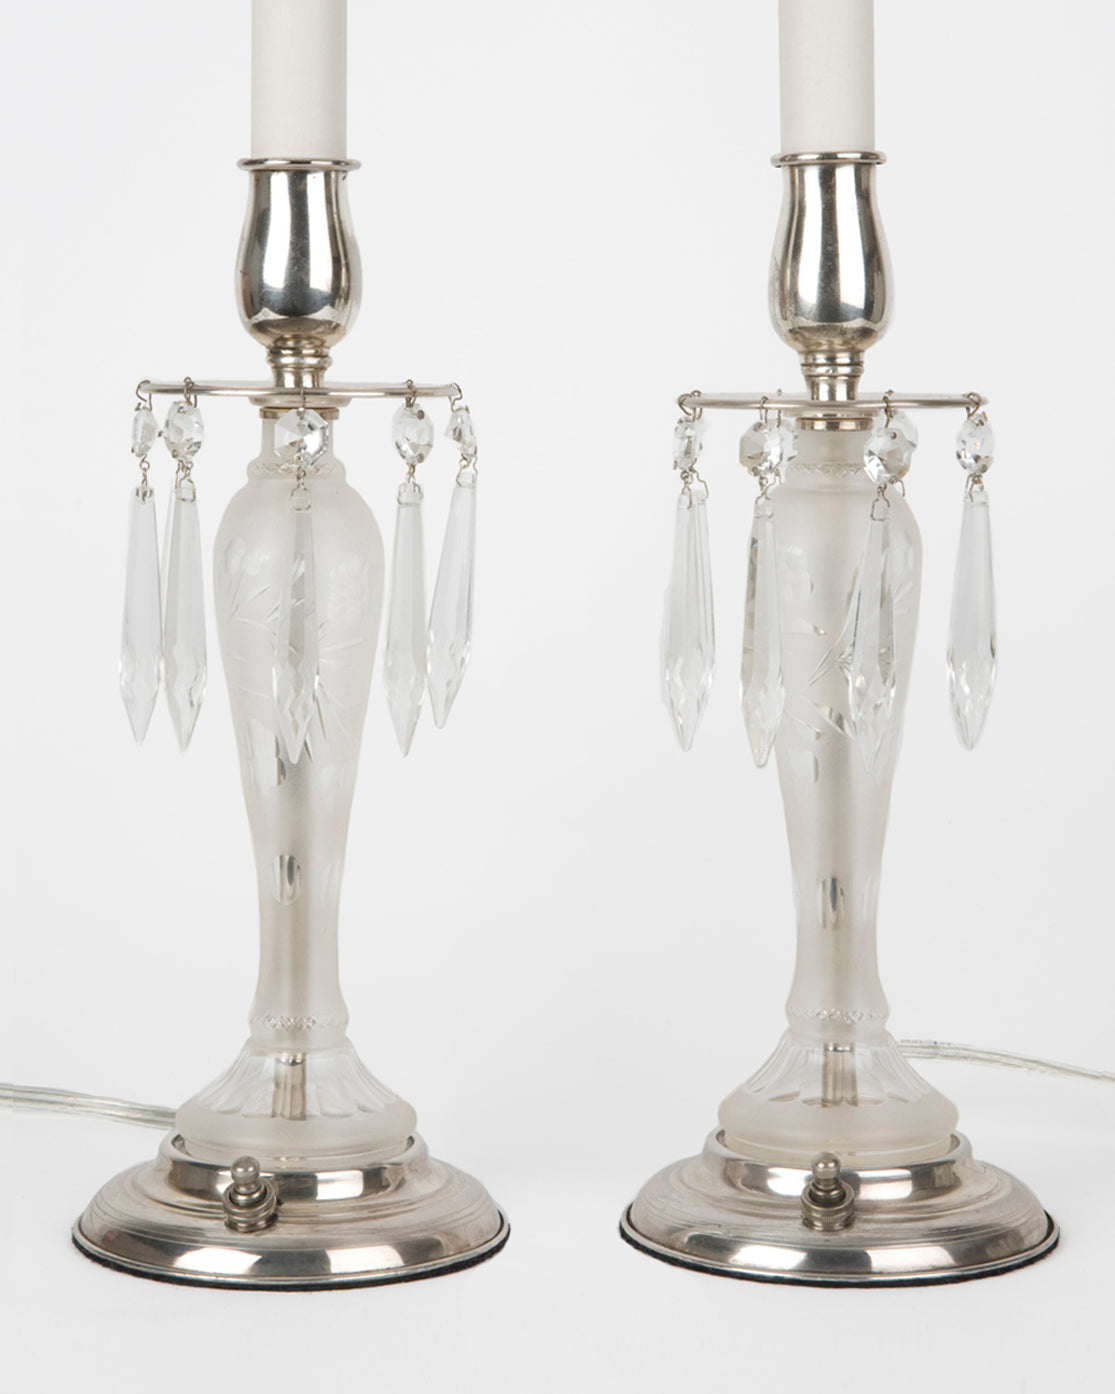 meget Trolley Busk Wheel Cut Glass Candlestick Lamps with Crystal Prisms | Vintage Collection